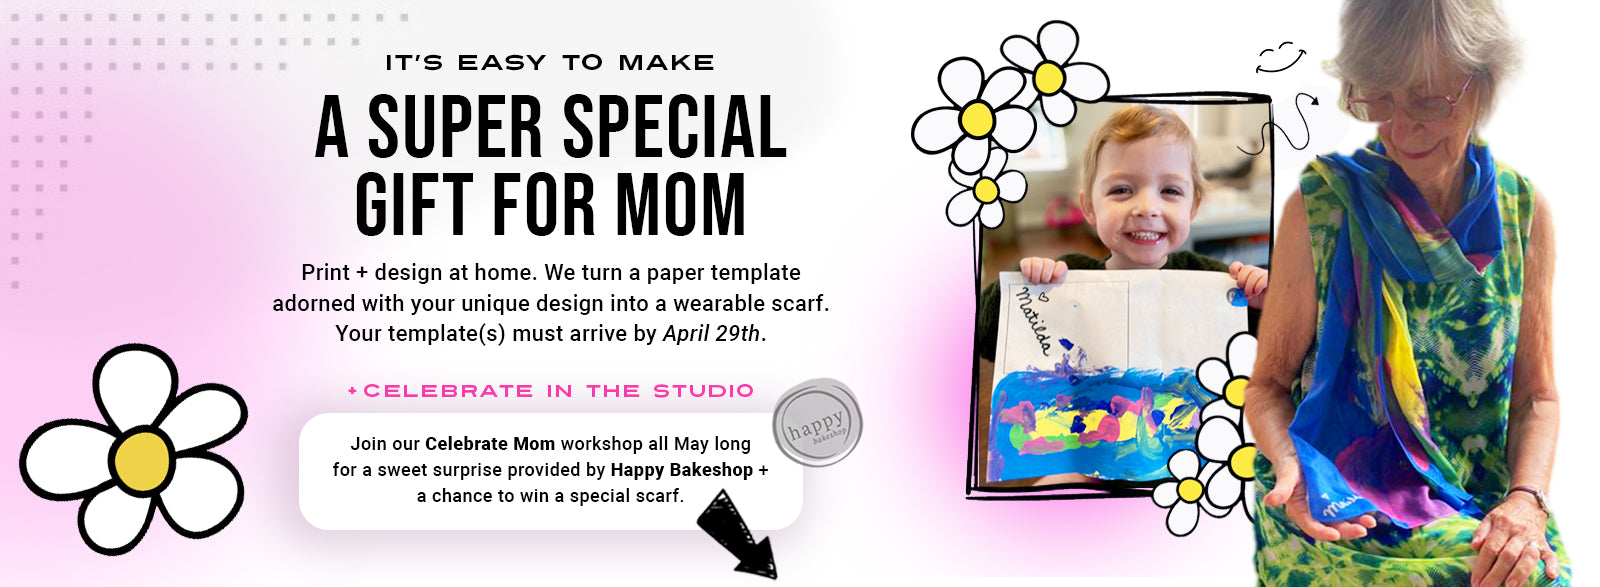 Make a super special gift for mom right from home -- It's easy! Print your template and start designing. We'll turn it into a one-of-a-kind wearable scarf. Your templates must arrive by April 29th for on time gifting.